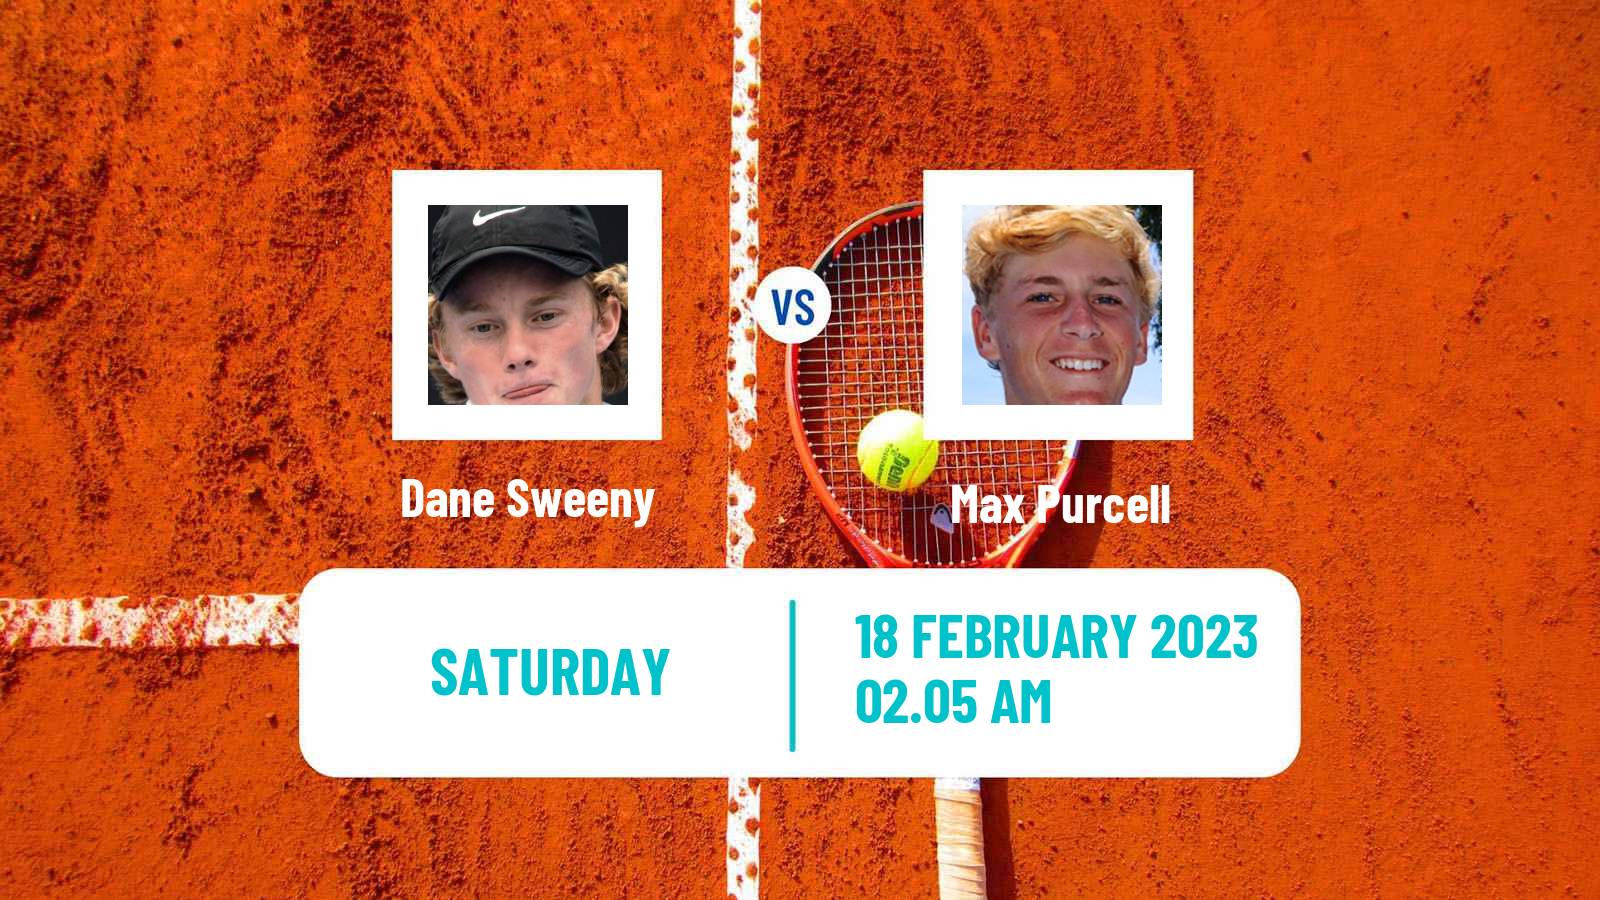 Tennis ATP Challenger Dane Sweeny - Max Purcell